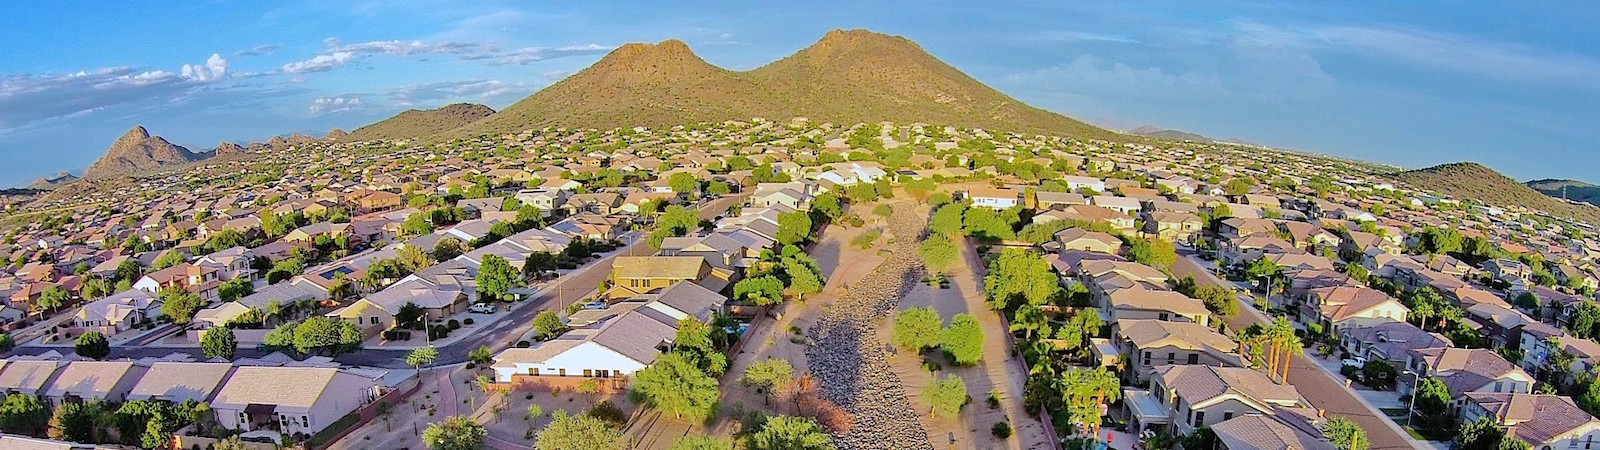 Top Places to Retire in Arizona, The Most Beautiful State!